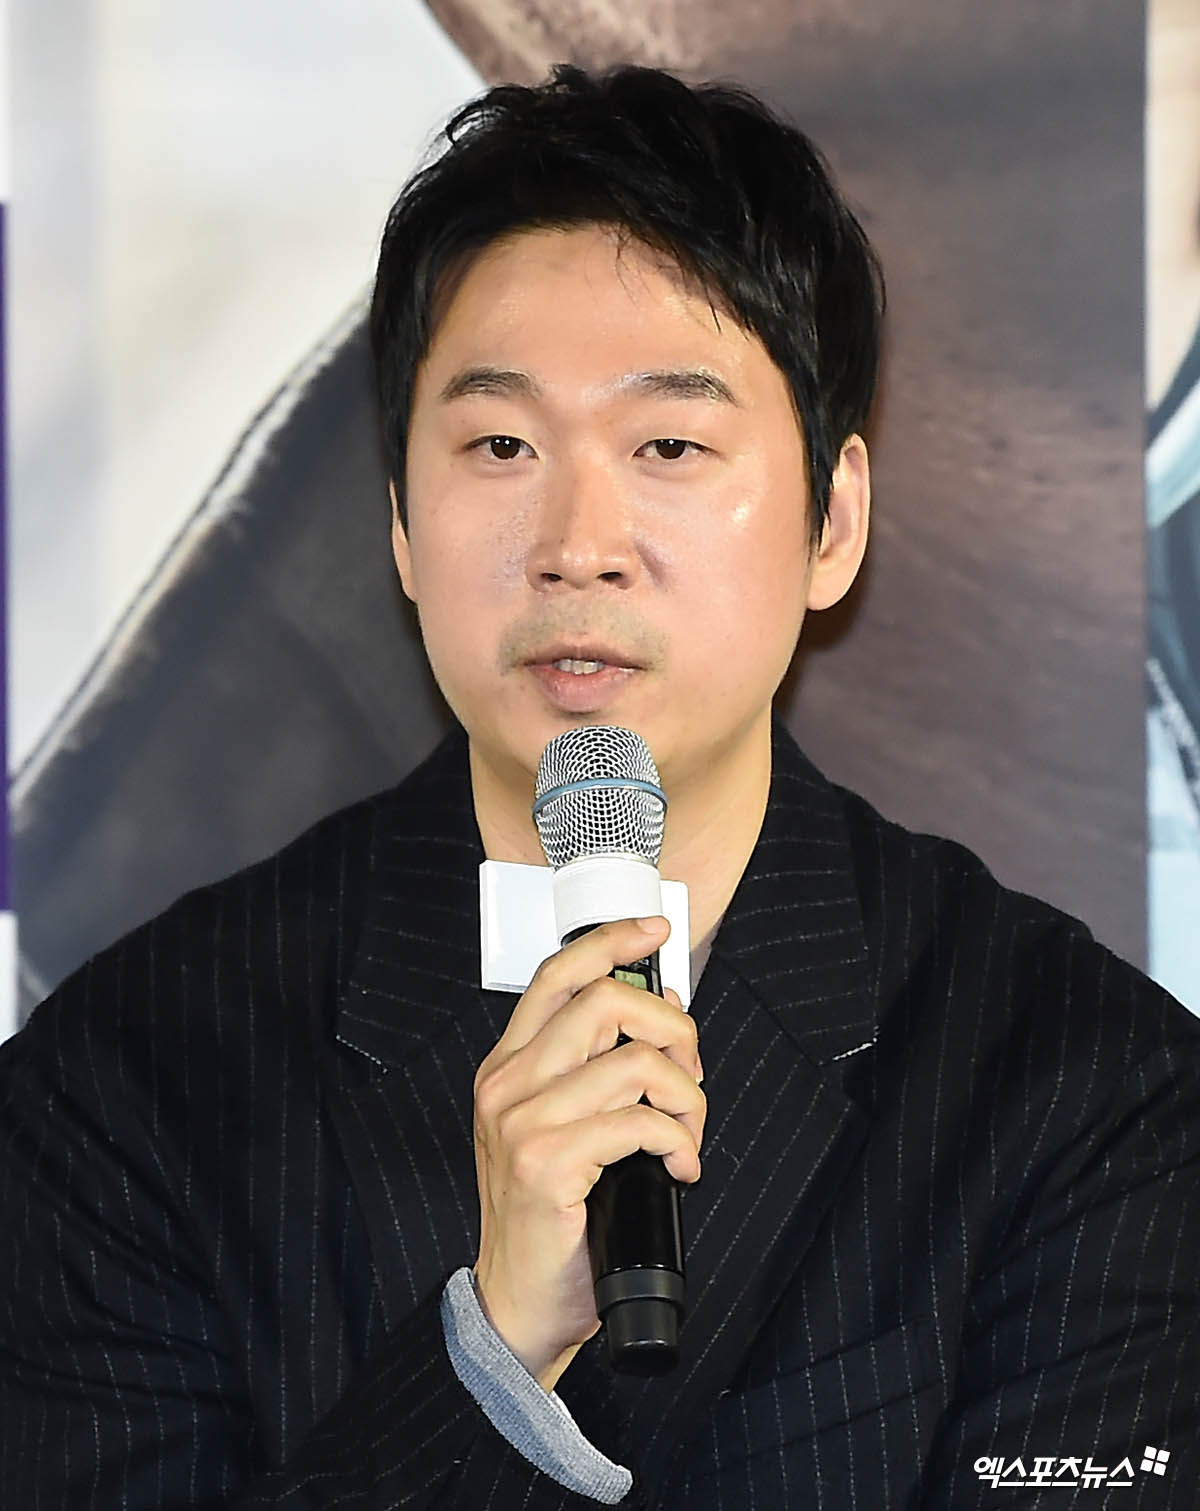 Actors, such as Jeon Do-yeon, Jung Woo-sung, and Youn Yuh-jung, have united as brutes who want to catch straws.On the 13th, a production report of the movie The Animals Who Want to Hold the Jeep (director Kim Yong-hoon) was held at Megabox Seongsu in Seongdong-gu, Seoul.Actor Jeon Do-yeon, Jung Woo-sung, Youn Yuh-jung, Shin Hyun-bin, Jeongaram and Kim Yong-hoon attended the ceremony.The brutes who want to catch straw is a crime scene of ordinary humans planning the worst of the worst to take the last chance of life, the money bag.Based on the novel by Japan writer Sone Keisukes Dongmyeong.Jeon Do-yeon played the role of Yeon-hee, who is trying to erase the past and live a new life, and Tae-young, who dreams of a bad dream because of his lover who has disappeared.Bae Sung-woo is a part-time worker who continues his familys livelihood, and Youn Yuh-jung is divided into the lost memories.On that day, Youn Yuh-jung said, I hate (personally) blood-inducing movies, but this movie was a little different (in the cast) and Jeon Do-yeon called and asked me to join him.So I thought it was a very important and big role, but it doesnt come out much (in the movie), he quipped.Jeon Do-yeon said: The script was fun, it could be an obvious crime genre, but the dramatic composition was fresh; the appearance of several characters was also new.And I contacted Mr. Youn Yuh-jung because I felt that it was a reversal and a mystery. It was a role that I could not do unless I was a teacher. Jung Woo-sung said, When I look at the scenario, I participated in the film, which shows how much I can be destitute in front of the material and how I feel.Above all, I could be with Mr. Jeon Do-yeon, so I chose (the film).Many people said I might have worked with Jeon Do-yeon, but I never did. I wondered why I couldnt.It was a short but fun task, he said.Kim Yong-hoon said, I think it is a great honor and a dream to be able to work with Legend Actors to a new director.It was like playing the All-Star game from the first Kyonggi when I played baseball, and I was burdened with it, and I was under pressure to put pressure on their reputation.However, Actors filled me with my shortage and empty parts. It was a series of surprises every time I worked together. Shin Hyun-bin has transformed into a housewife Miran, whose family has collapsed and has fallen into a swamp of misfortune due to a moment of failure to invest in stocks, and Jungaram has taken on the role of illegal immigrant Jin Tae,Shin Hyun-bin said, I was worried because I had to convey the feelings I felt when I saw the scenario. Miran is a person who plans but does not go to his will.I was acting as a character who lives instinctively every day, concentrating on the moment, and I thought that I would like to look different from the existing one. I thought the friend of Jin-tae was very pure, said Jeong Ga-ram, who challenged the transformation of the past class from weight loss to hair bleaching and dialect acting.Rather than looking at the distant future, he was faithful to the feelings I felt right away and did what he wanted to leave the fence of the law.I did my best to feel the moment rather than the external one. The beasts who want to catch straws is based on the novel of Dongmyeong by Japanese writer Sonne Keisuke.Director Kim Yong-hoon said, The original novel has a unique structure, and the structure can only be allowed in the novel, so how to change it cinematically was the key.I needed to rebuild the skeleton. I wanted to be a normal character in character.In the original work, Taeyoung (Jung Woo-sung) has a criminal job, and in the movie, he changed to a customs officer to make a more ordinary and common sense.The ending of the novel and the ending of the movie have changed. Finally, director Kim Yong-hoon said, The animals that want to catch straws are like running if they are exercised. It is not a movie that one person drags, but each character develops like a barton touch.I would like to see more fun if you watch the 400m relay Kyonggi. In addition, Actors with solid acting skills such as Jung Man-sik, Yoon Jae-moon, Jin Kyung, Park Ji-hwan, Kim Jun-han, Huh Dong-won and Bae Jin-woong are together to raise expectations.The animals that want to catch straw are scheduled to open on February 12th.